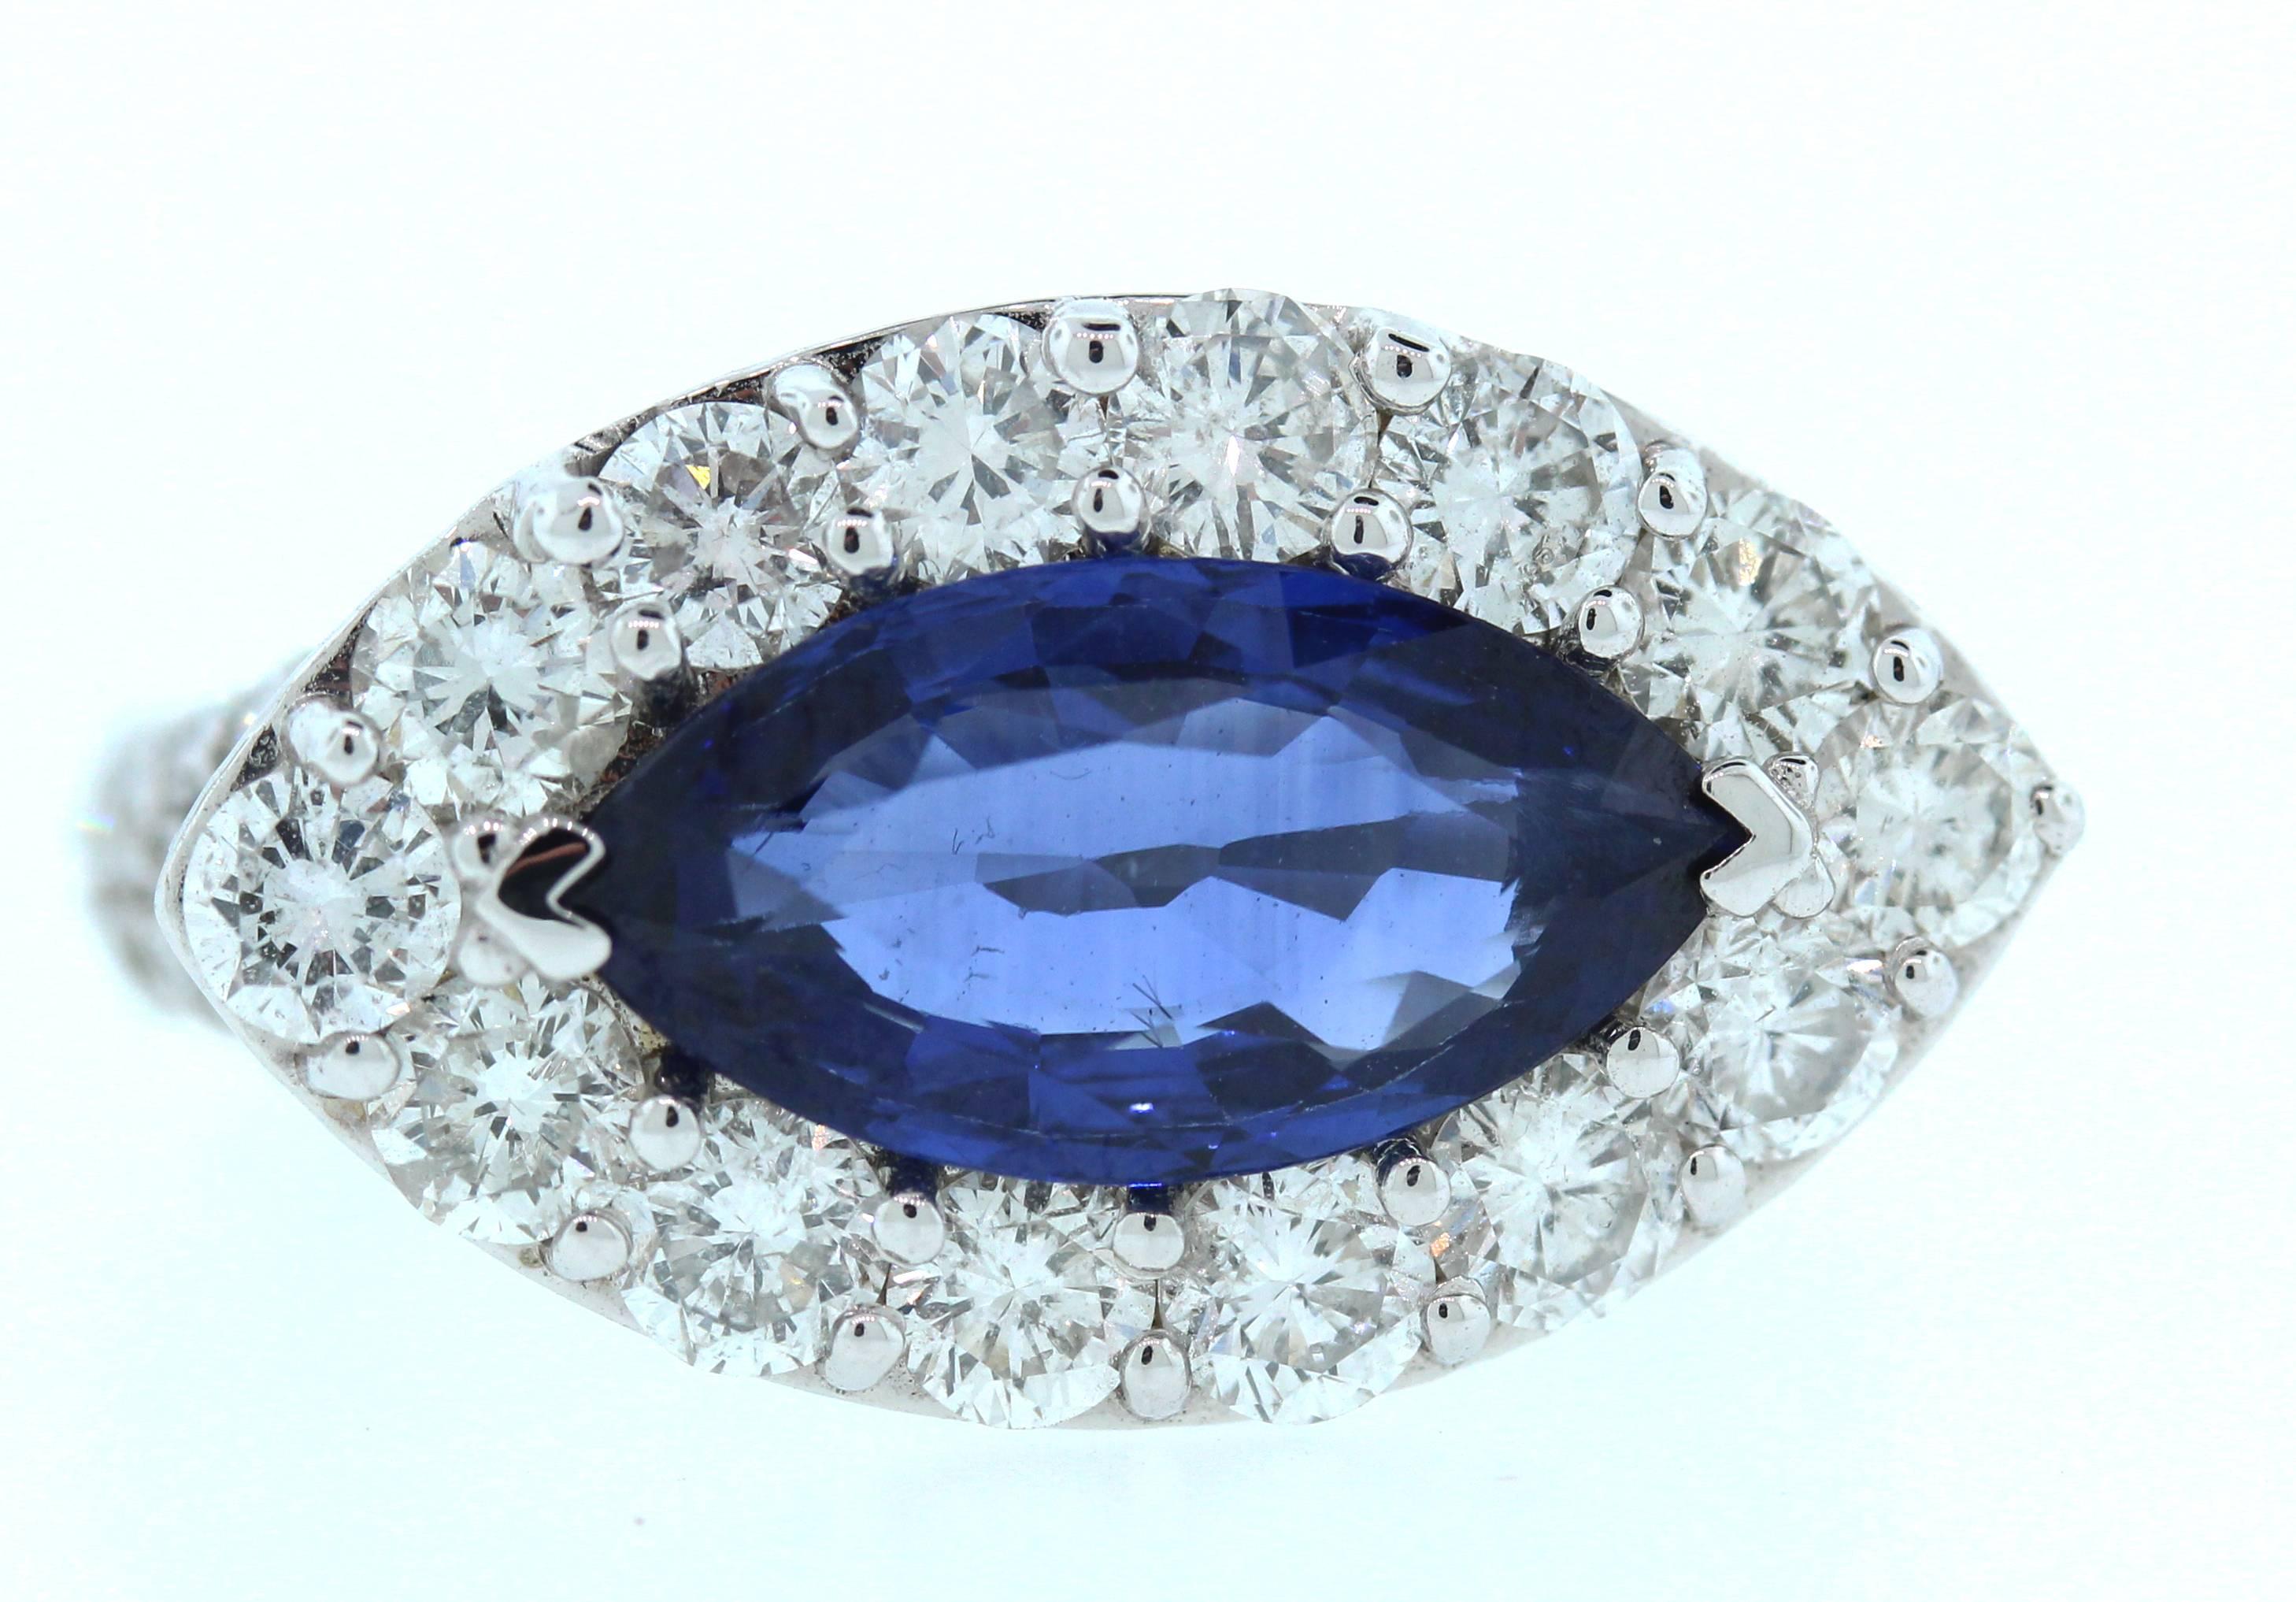 2.55 Carat Marquise Cut Blue Sapphire Diamond 18 Karat White Gold Cocktail Ring In Excellent Condition For Sale In Boca Raton, FL